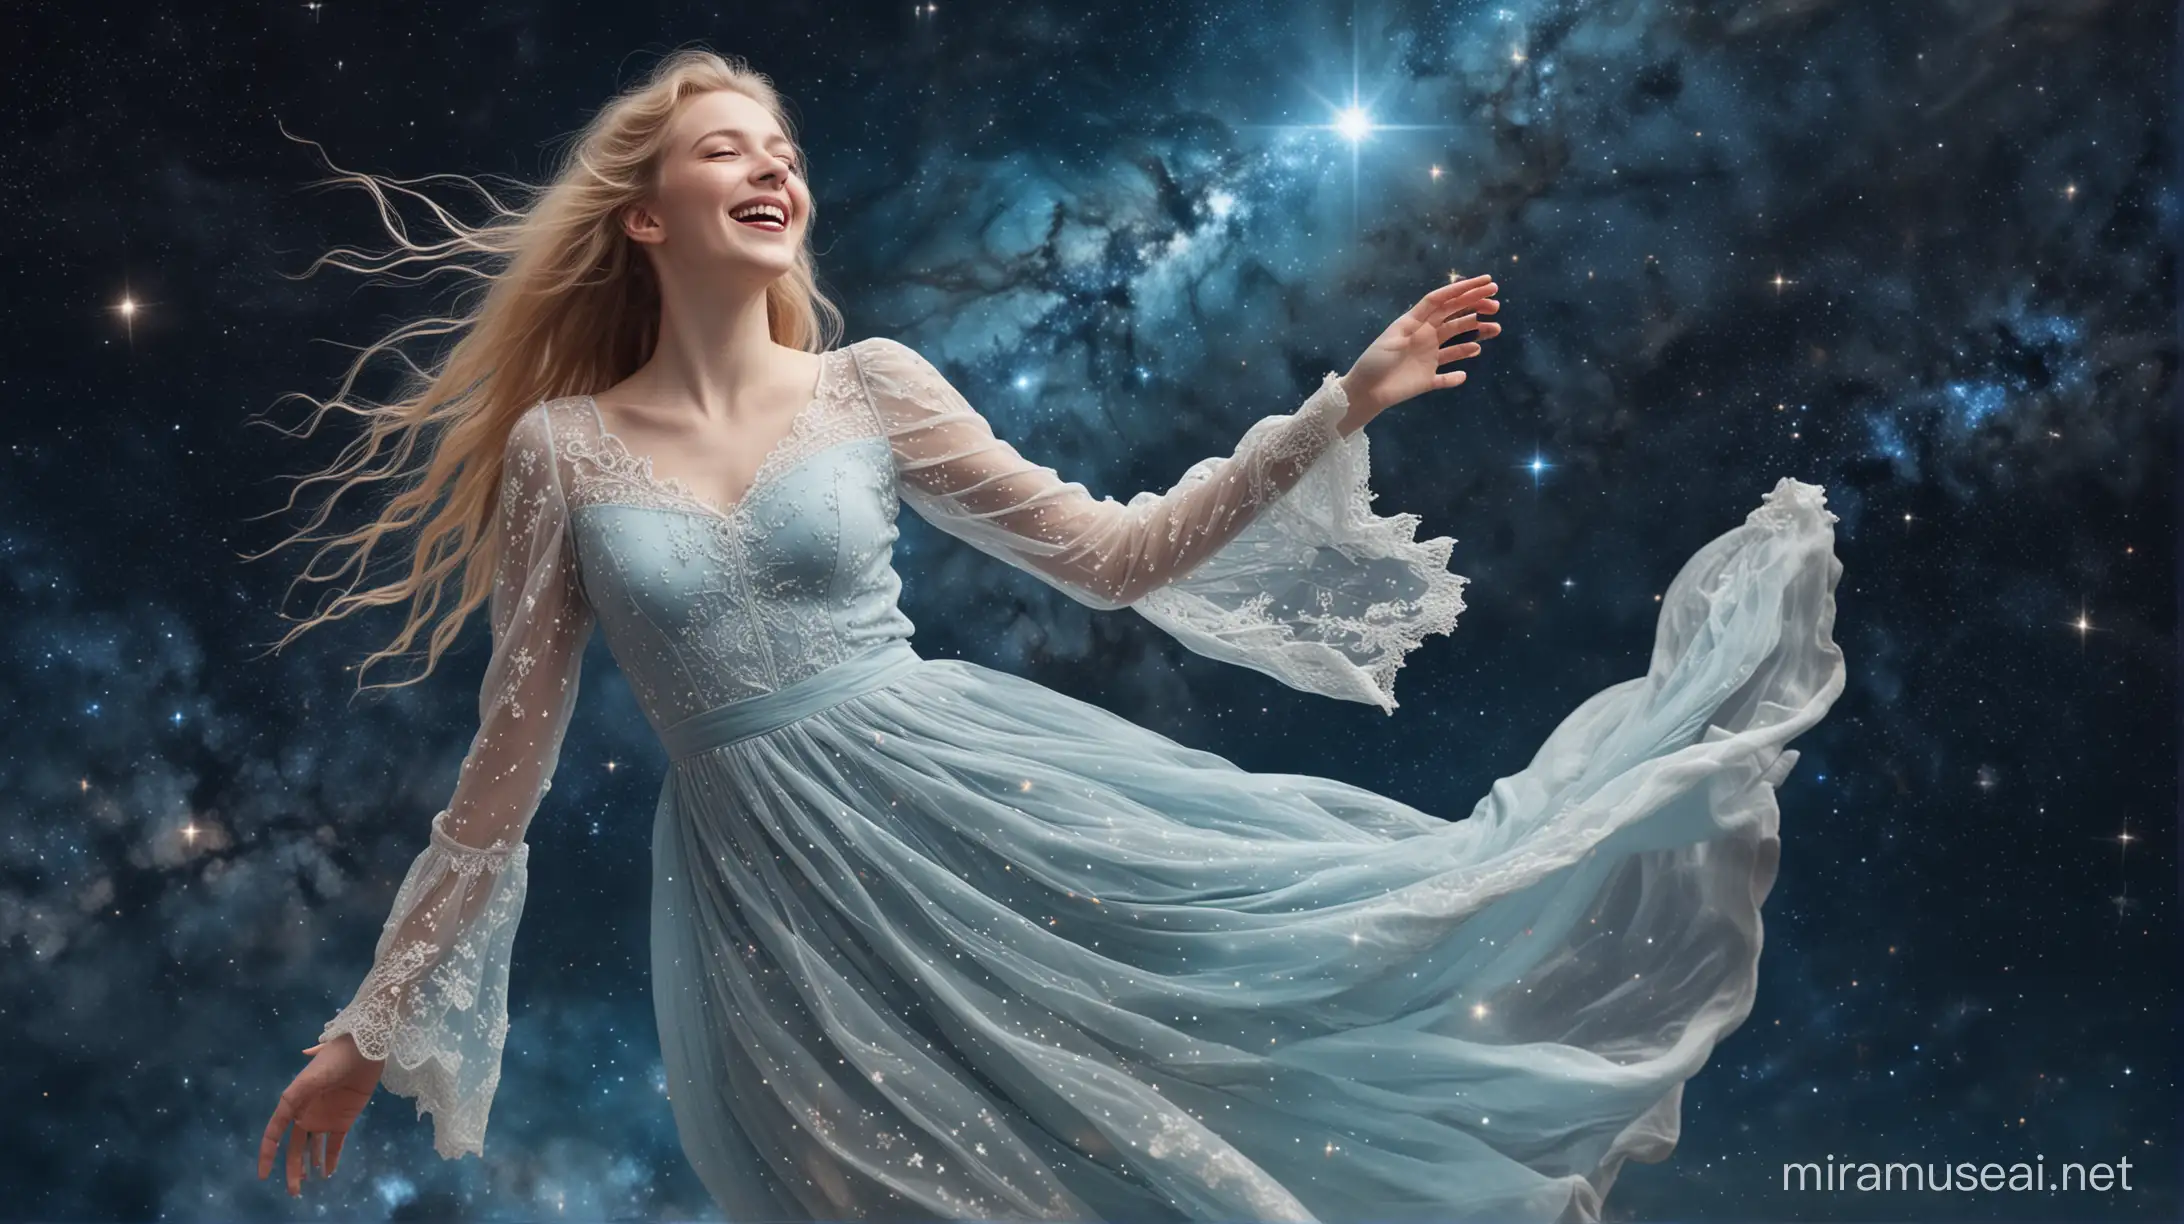 Young Woman in Romantic Dress Floating in Space with White Shining Cross